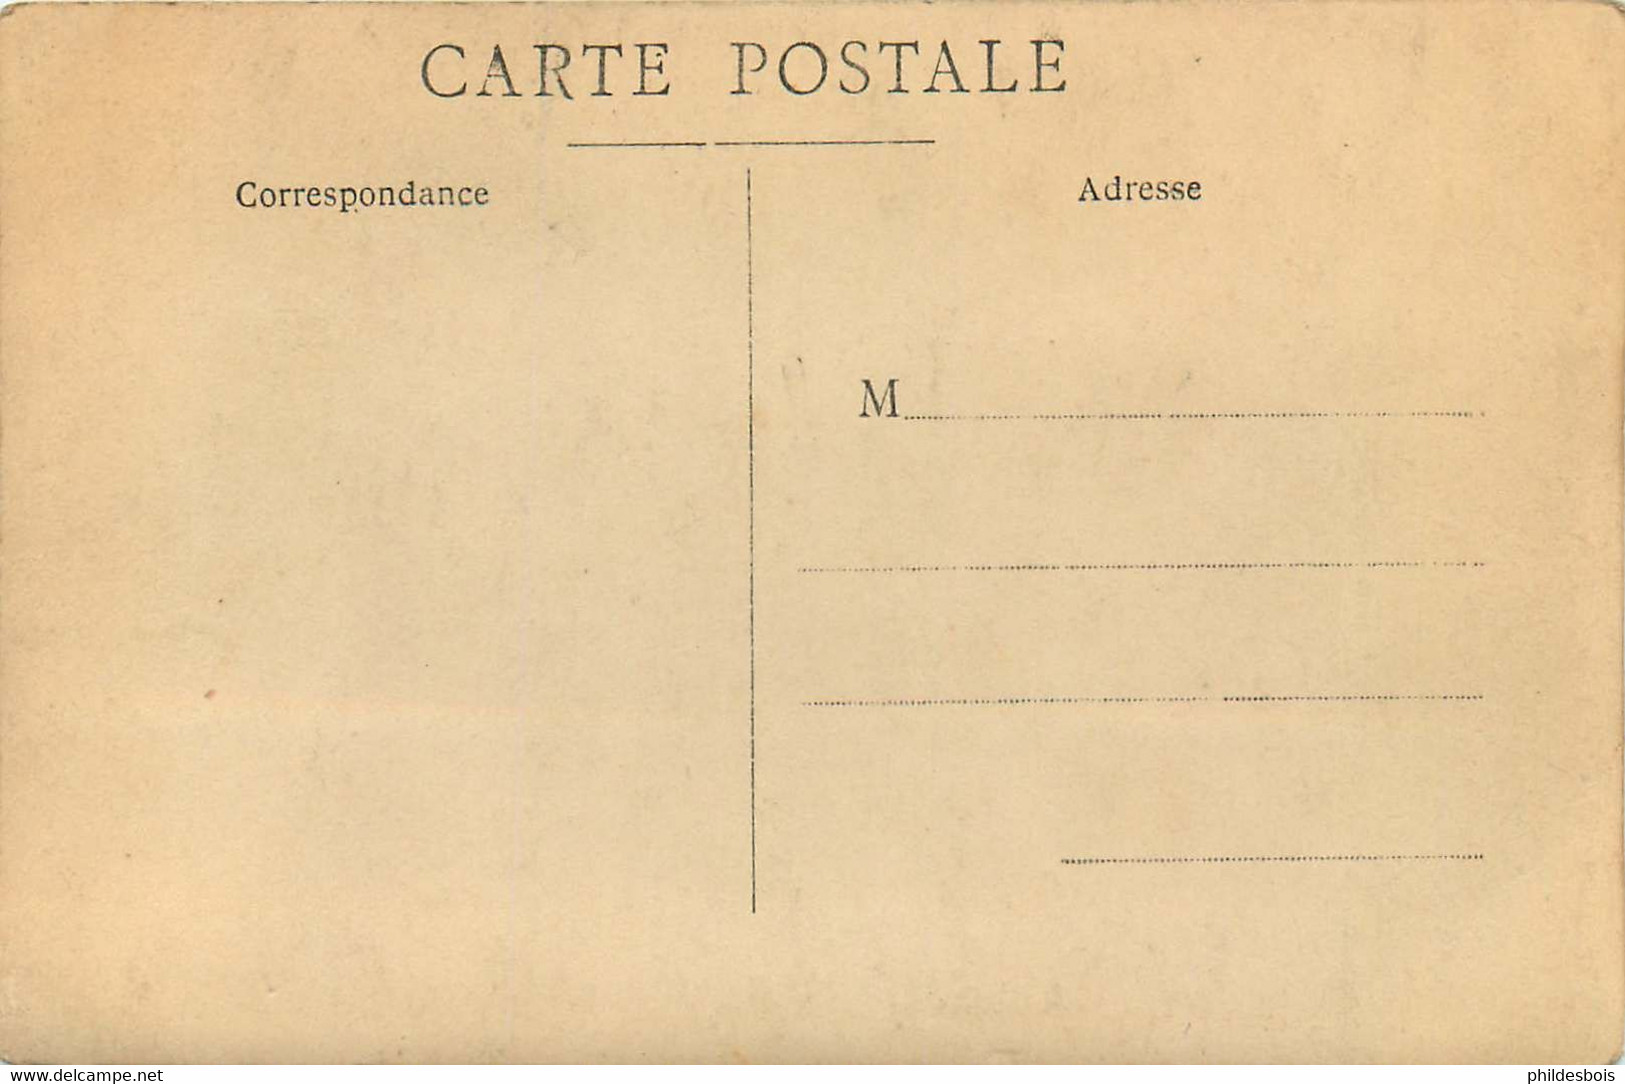 CARTE PHOTO MILITAIRE Manoeuvres , Materiels   ( A Identifier ) - Manoeuvres